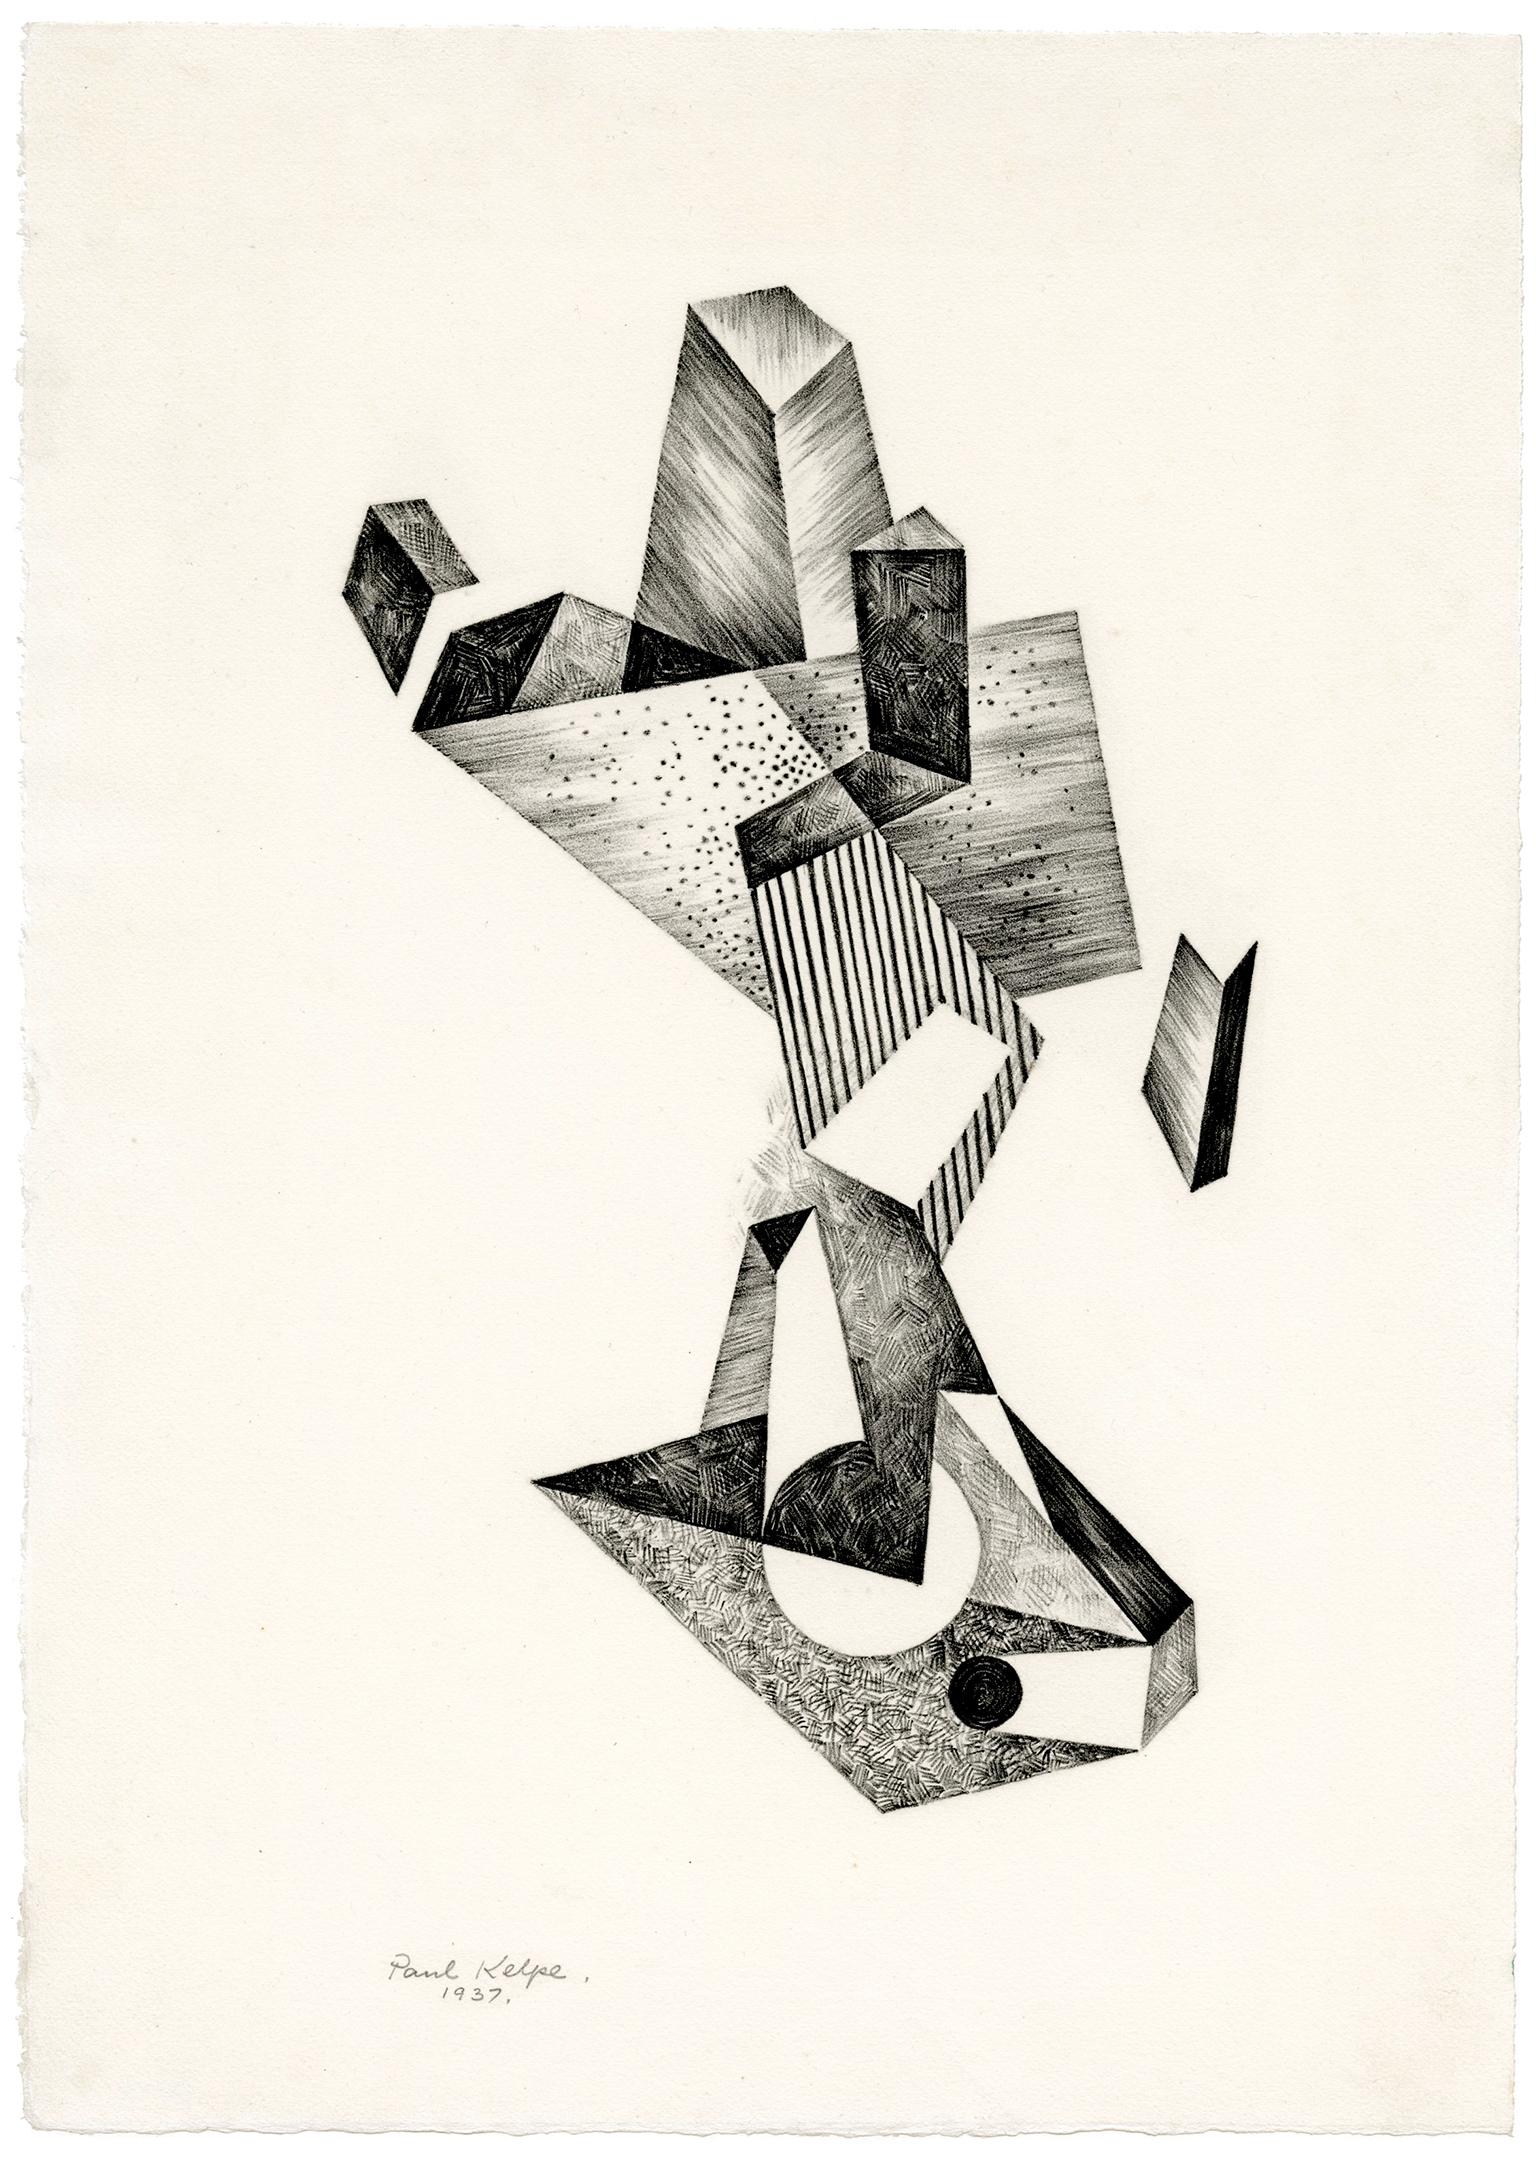 Constructivist Abstraction — 1930s Spacial Illusionism - Print by Paul Kelpe